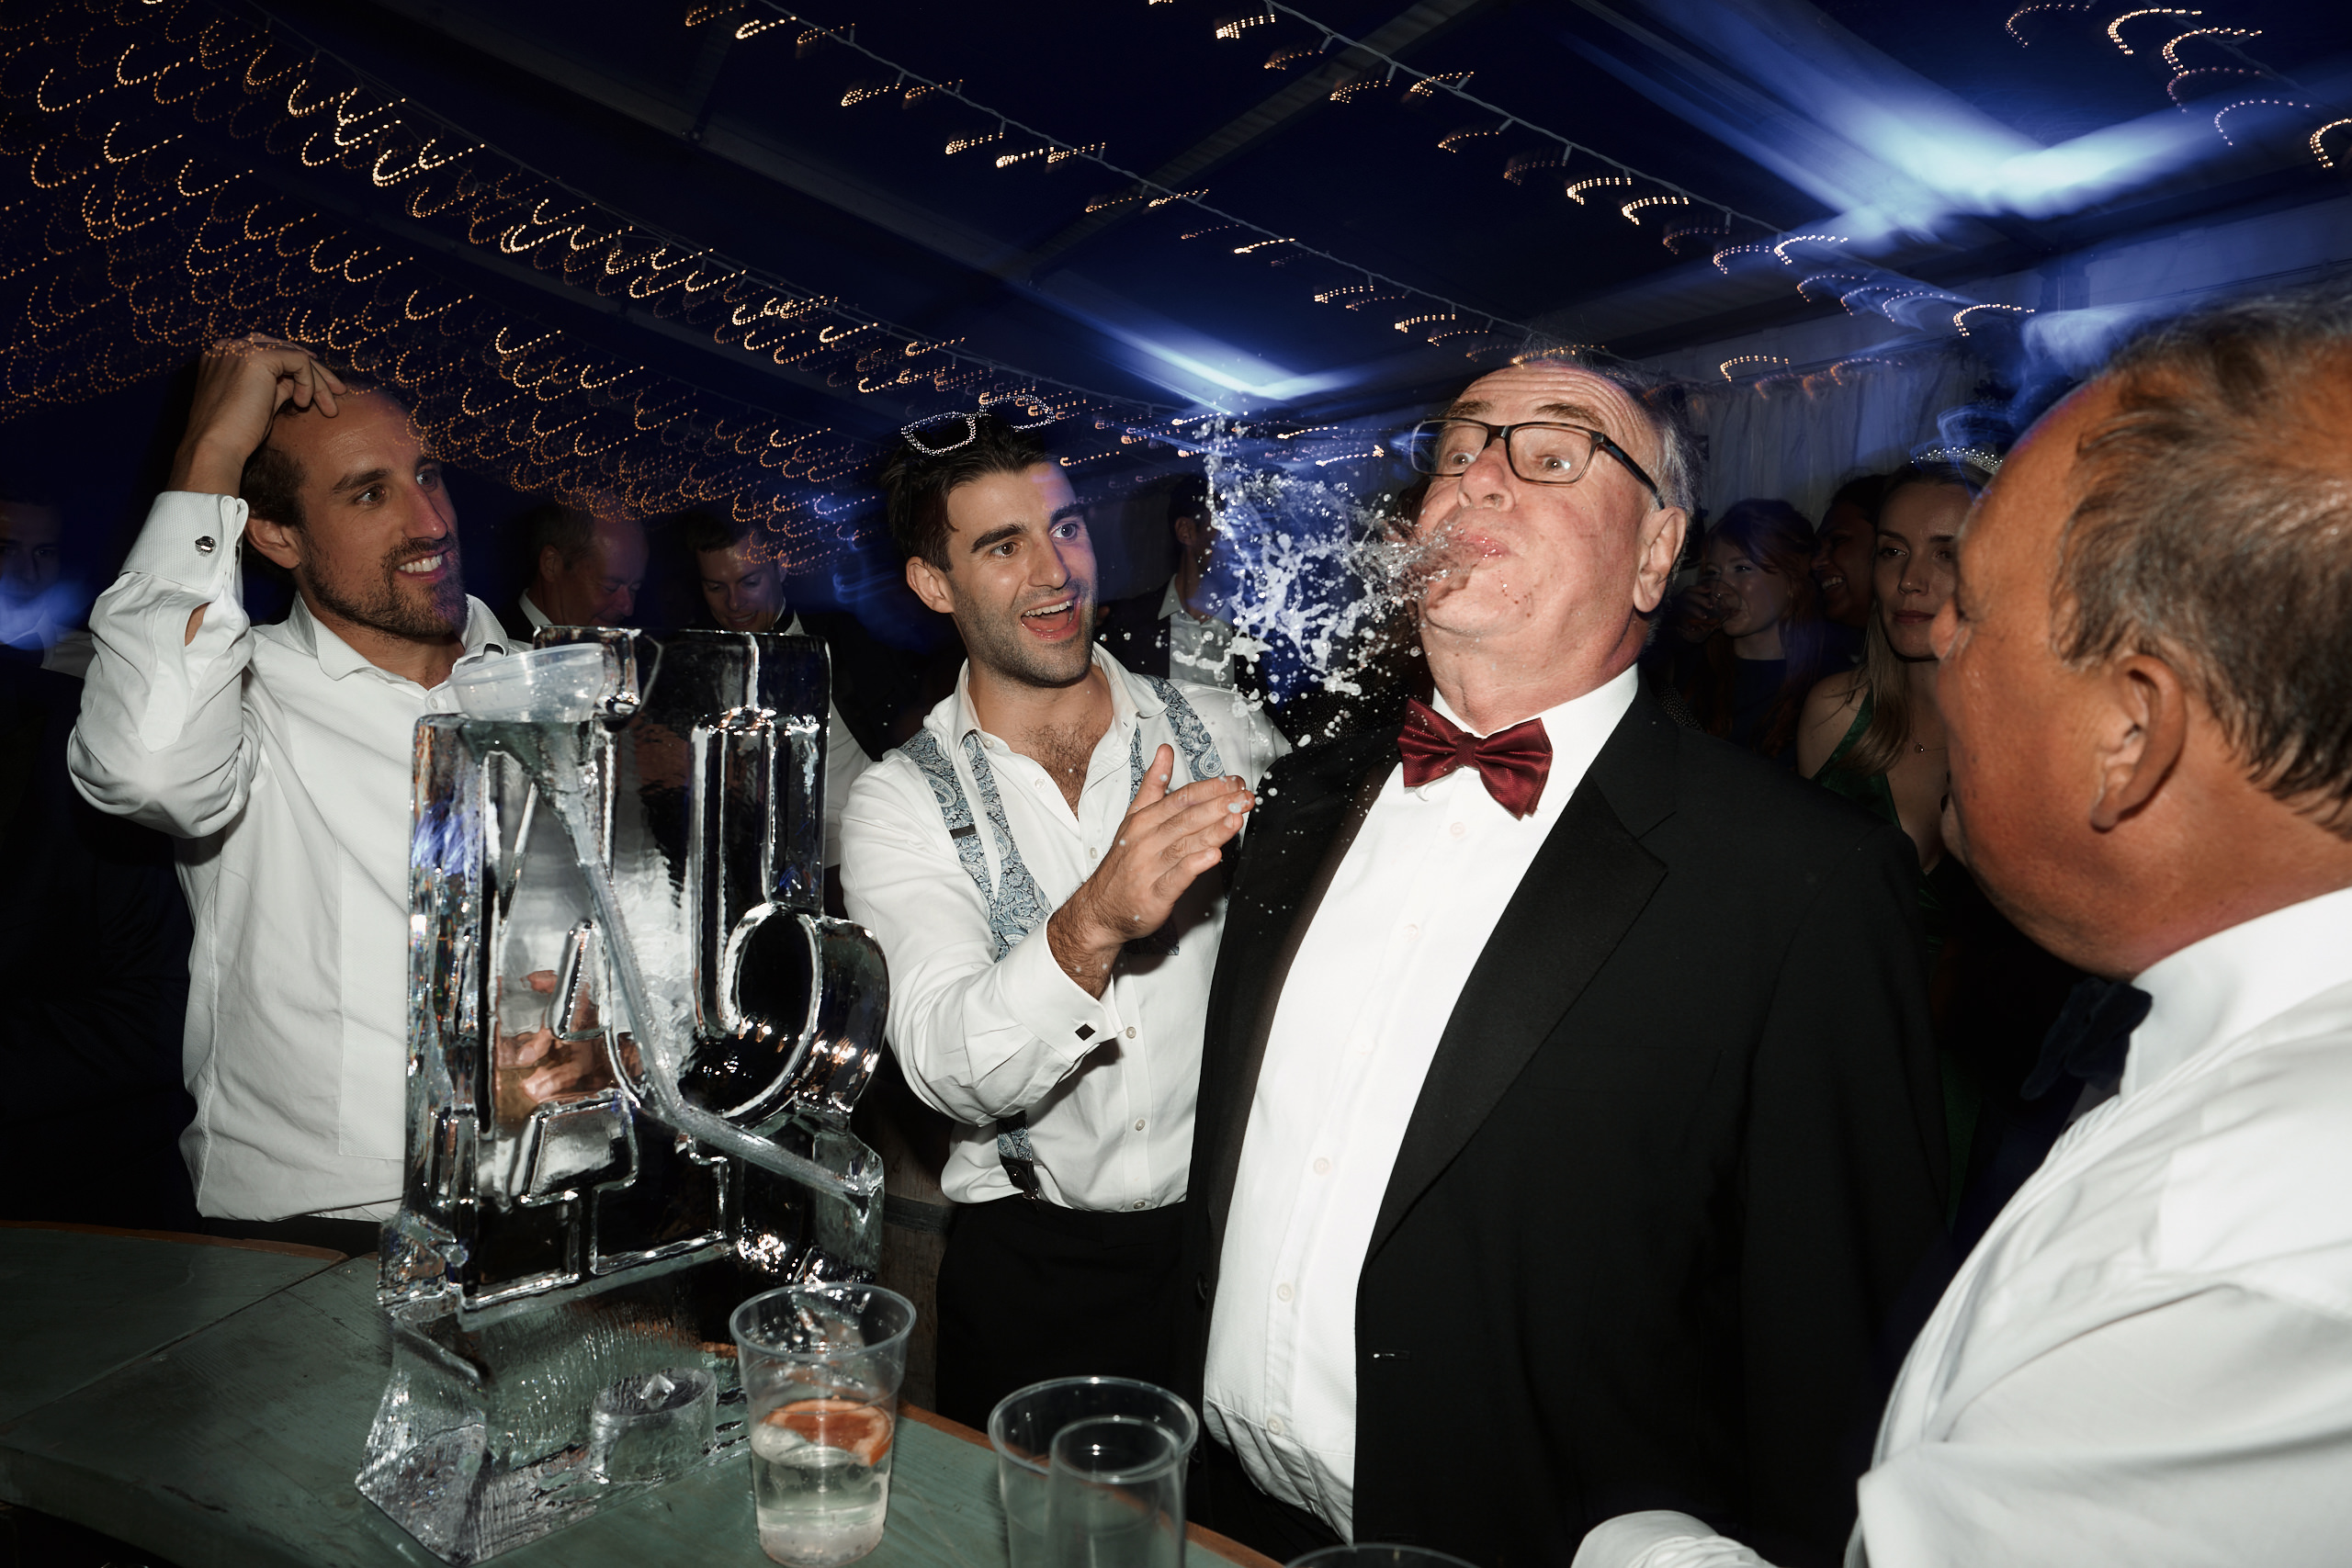 A guy in a fancy suit is blowing bubbles at a party.